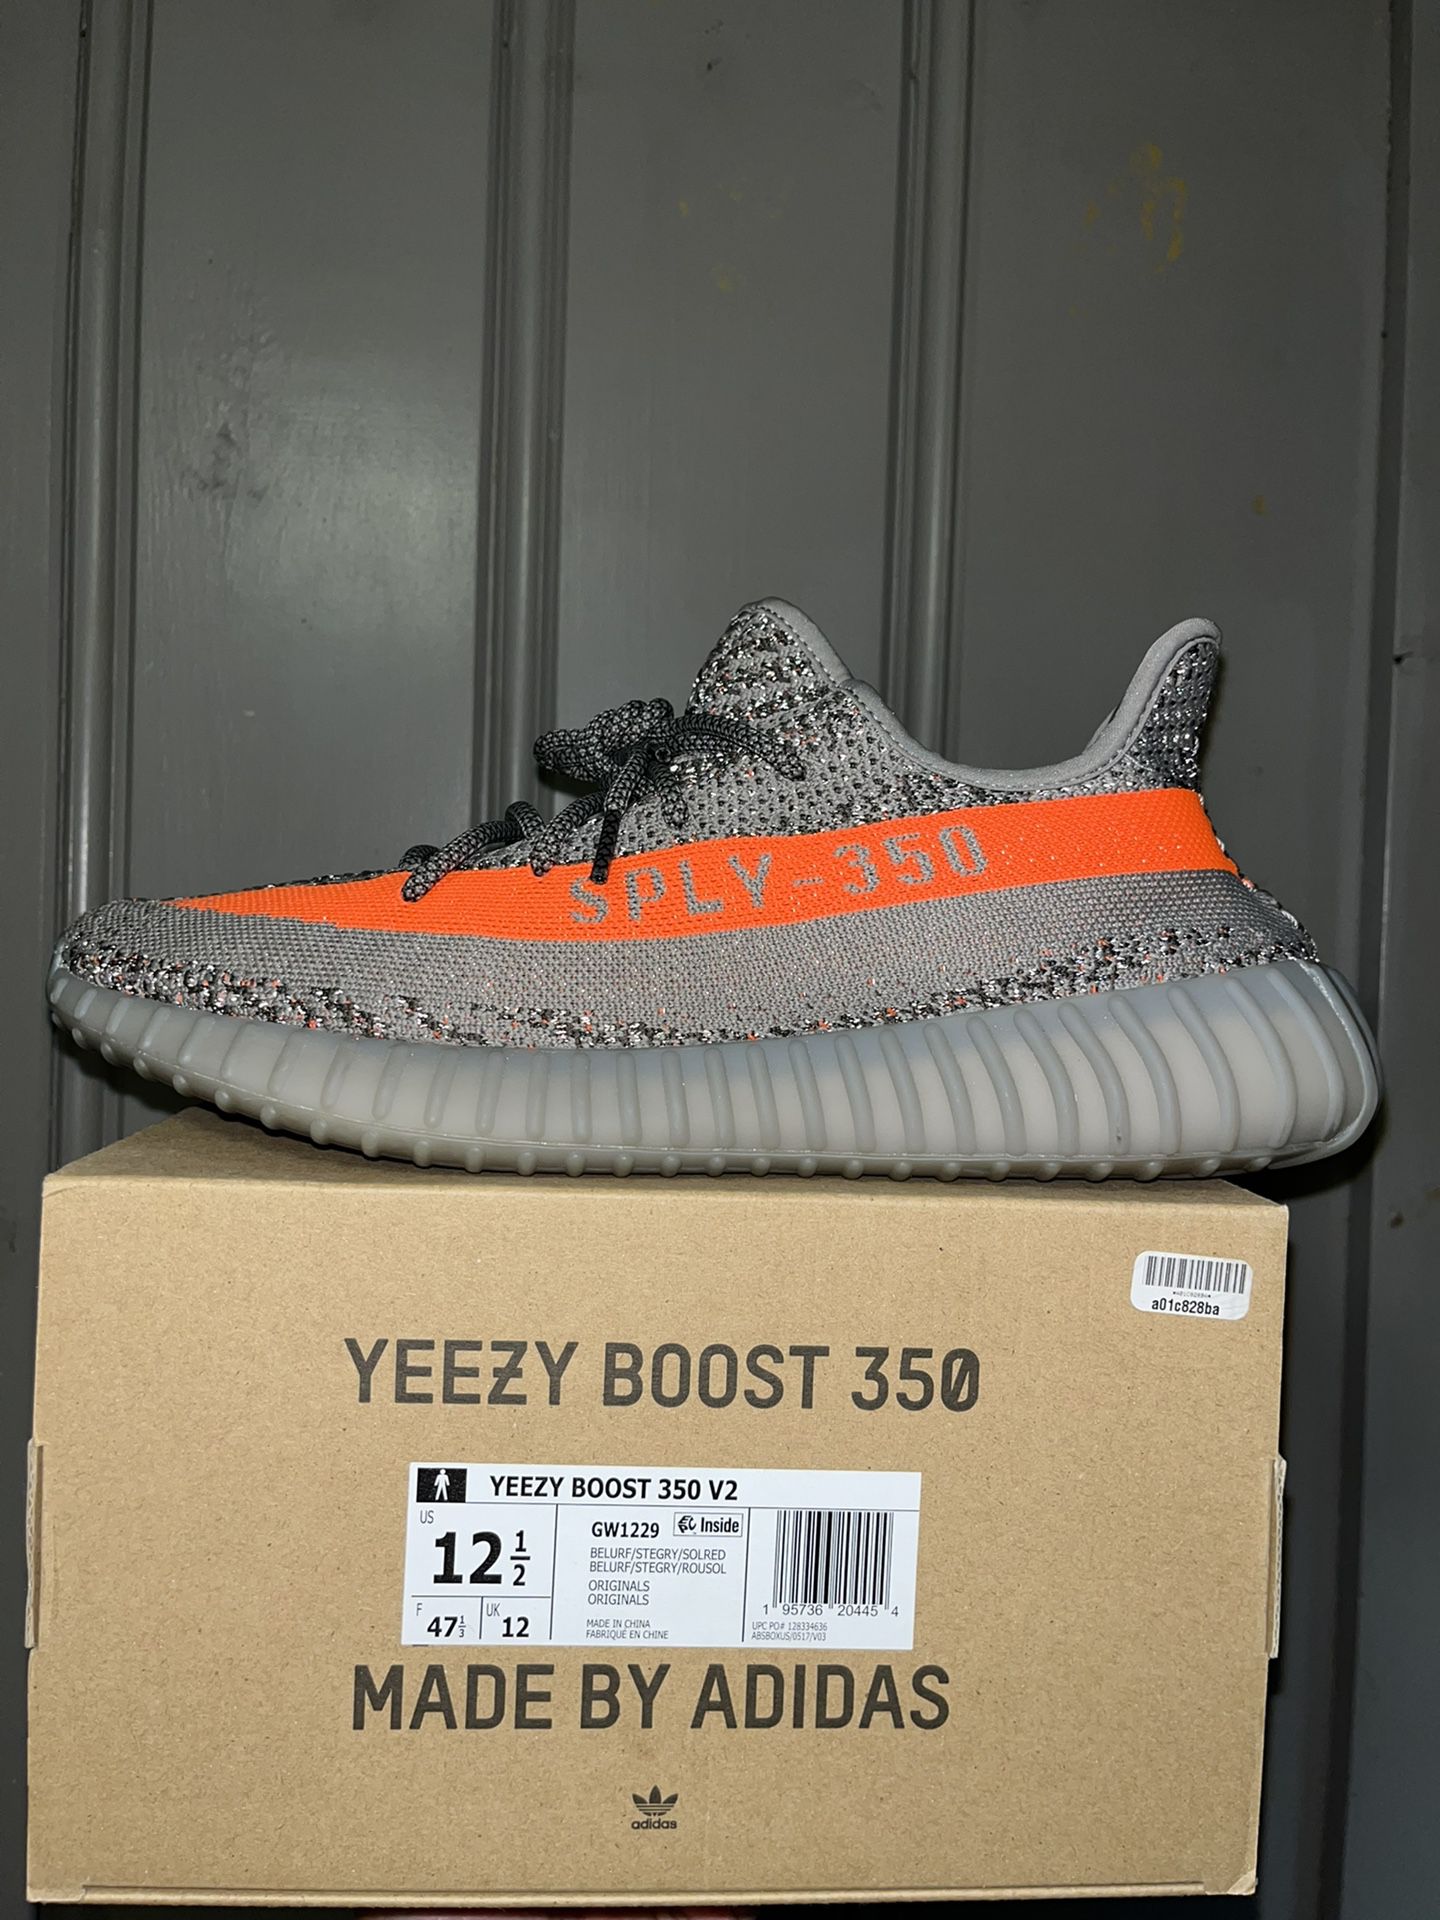 Adidas Yeezy Boost 350V2 “BELUGA/REFLECTIVE” Size (12.5) In Mens. Worn In Great Condition. Comes With Og All. $290. Cash. Trades. Welcome!